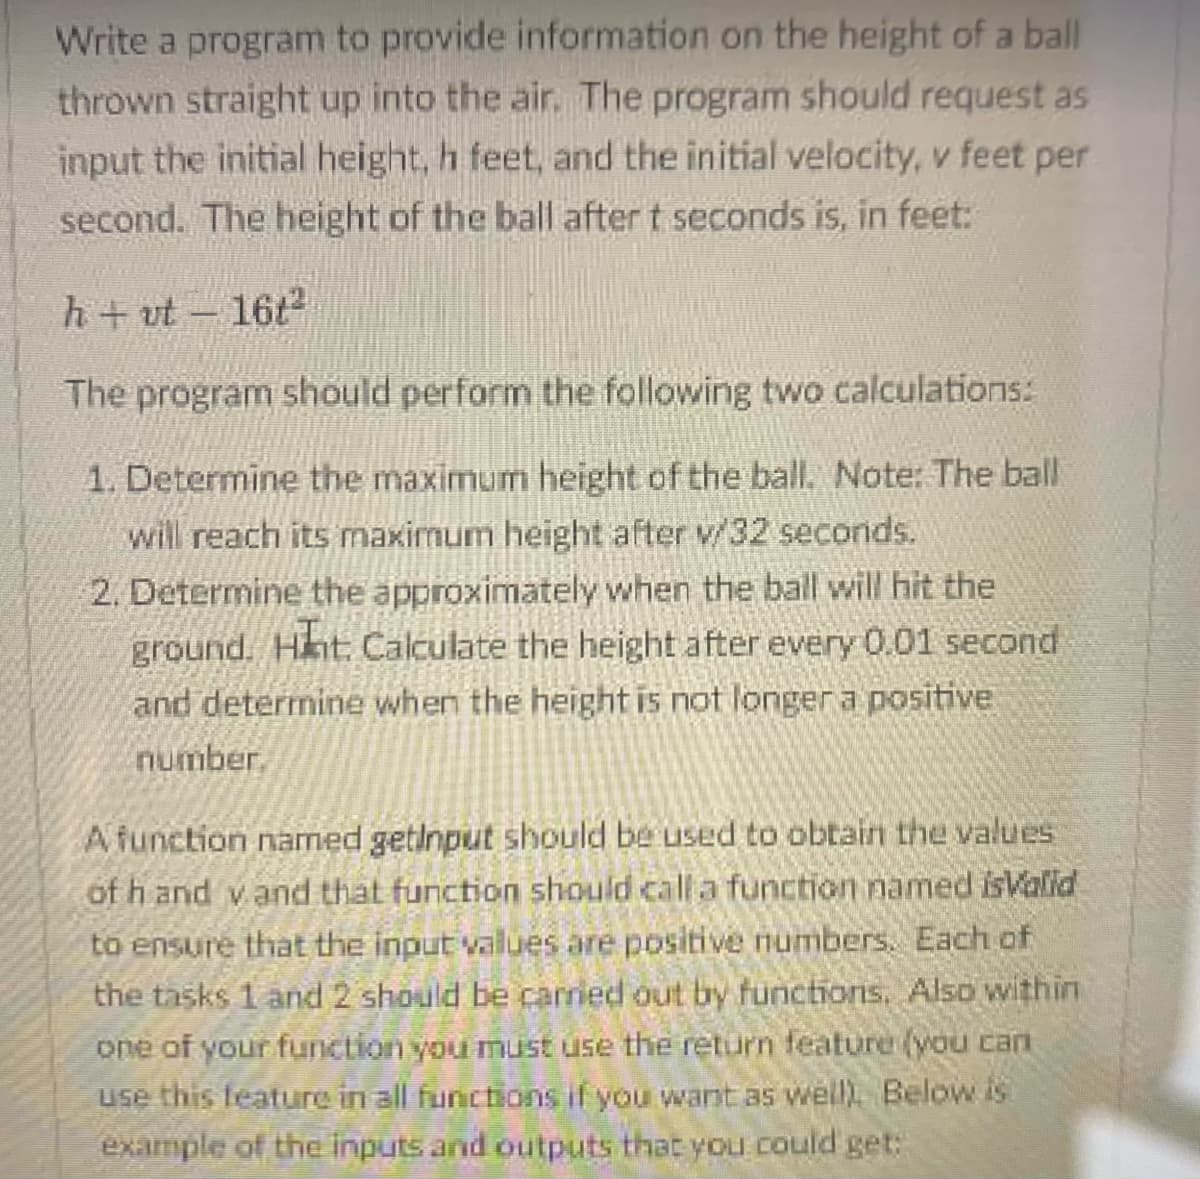 Write a program to provide information on the height of a ball
thrown straight up into the air, The program should request as
input the initial height, h feet, and the initial velocity, v feet per
second. The height of the ball after t seconds is, in feet:
h+ vt- 16t2
The program should perform the following two calculations:
1. Determine the maximum height of the ball. Note: The ball
will reach its maximum height after v/32 seconds.
2. Determine the approximately when the ball will hit the
ground. Hnt. Calculate the height after every 0.01 second
and determine when the height is not longer a positive
number.
A function named getinput should be used to obtain the values
of h and v and that function should calla function named isValid
to ensure that the input values are positive numbers. Each of
the tasks 1 and 2 should be carried out by functions. Also within
one of your function you must use the return feature (vou can
use this feature in all functions if you want as well). Below is
example of the inputs and outputs that you could get:
